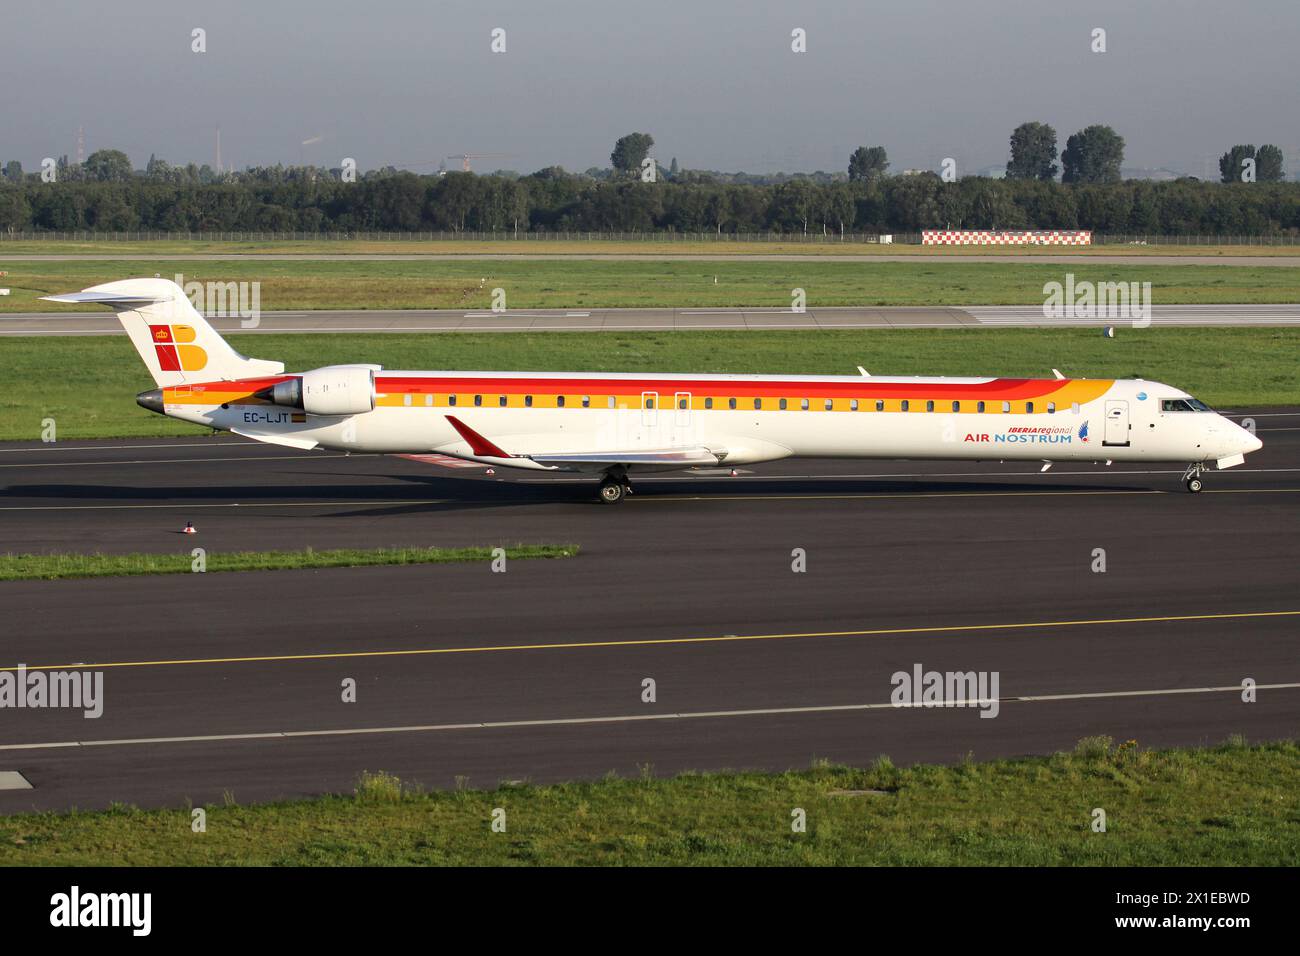 Spanish Air Nostrum Bombardier CRJ1000 with registration EC-LJT in Iberia Regional livery on taxiway at Dusseldorf Airport Stock Photo